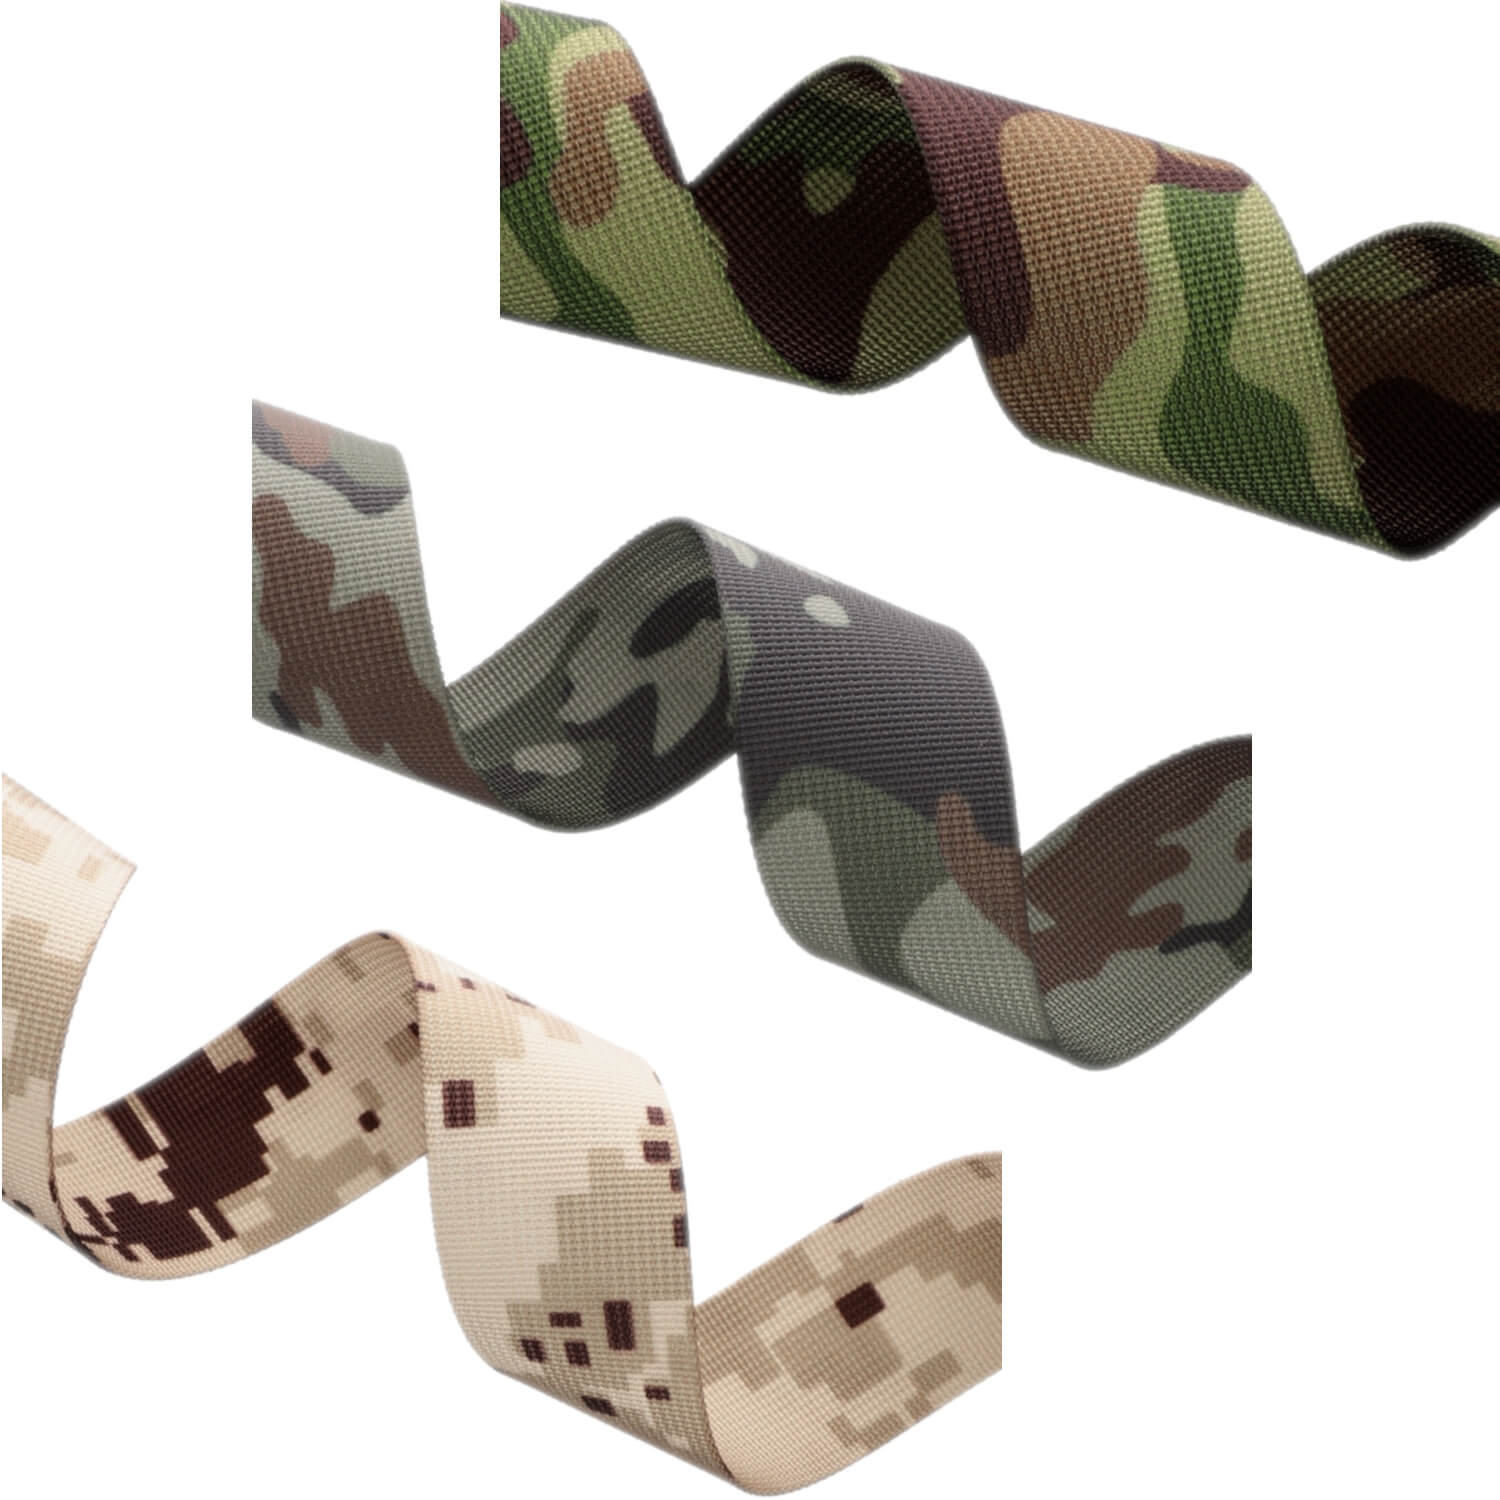 Gurtband / Tragband - 25mm Breite - Camouflage Muster & Pixel